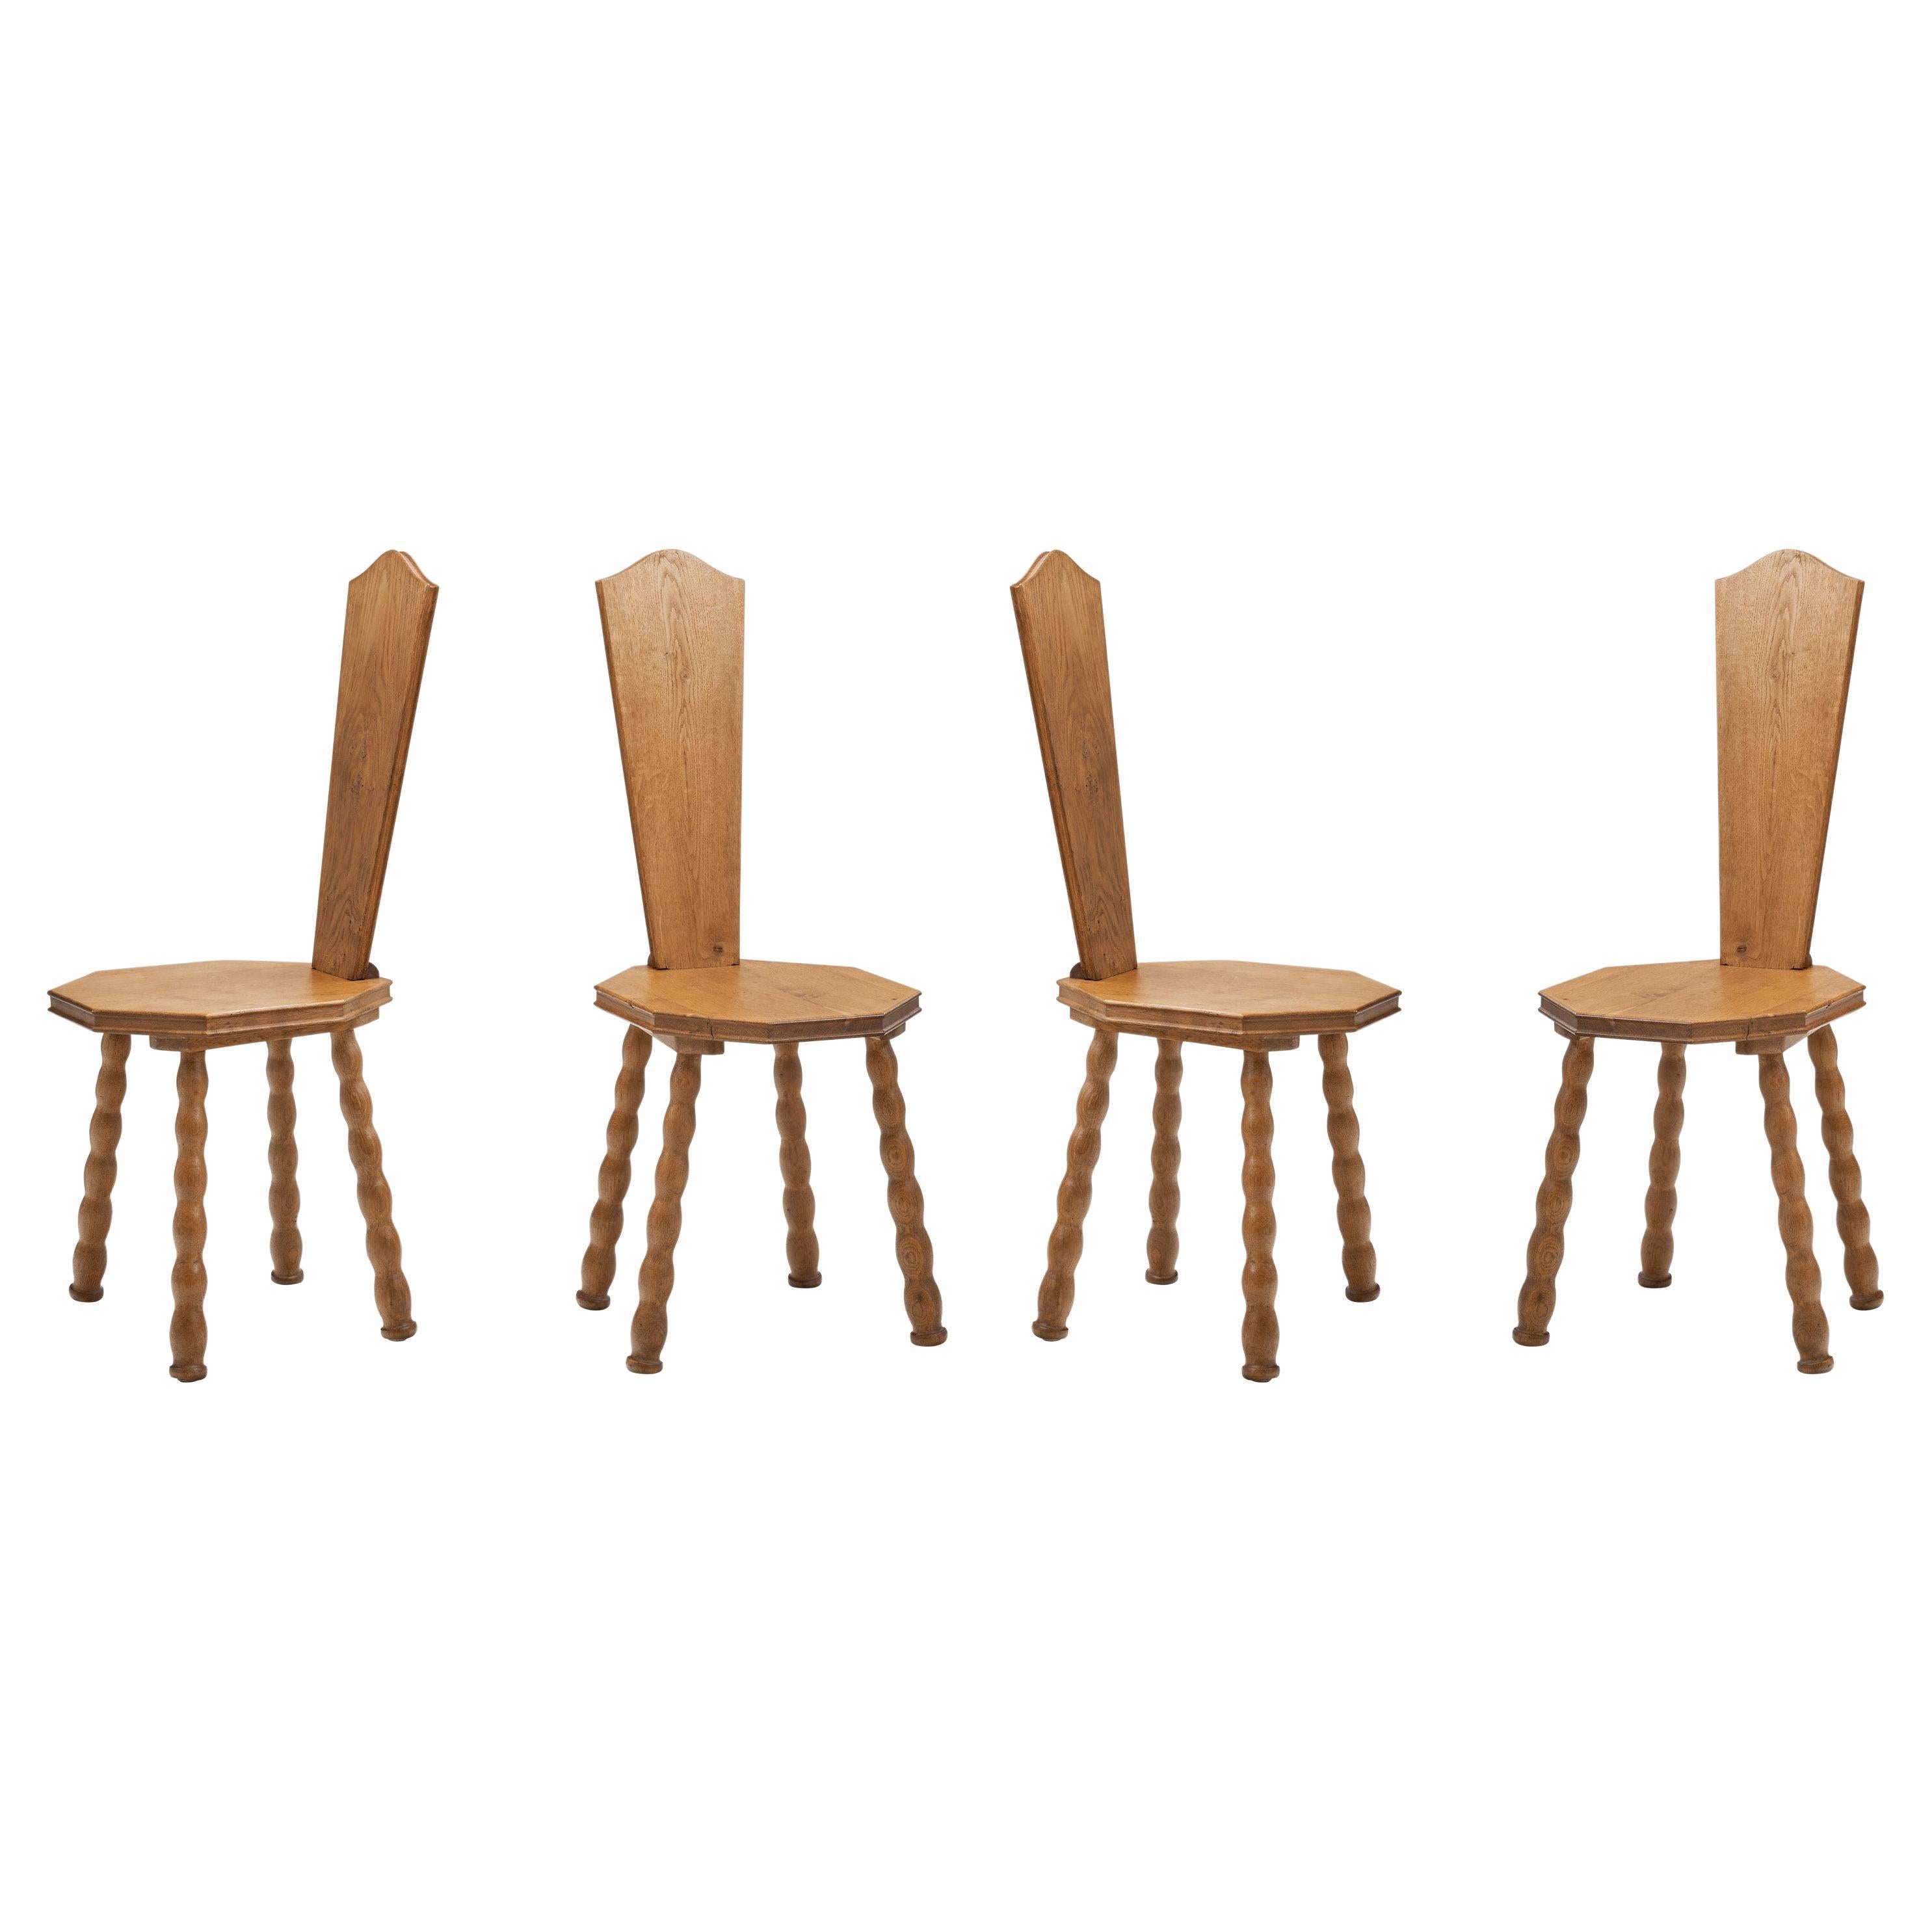 Set of 4 Sculptural Patinated Oak Spinning Chairs, Europe ca early 20th century For Sale